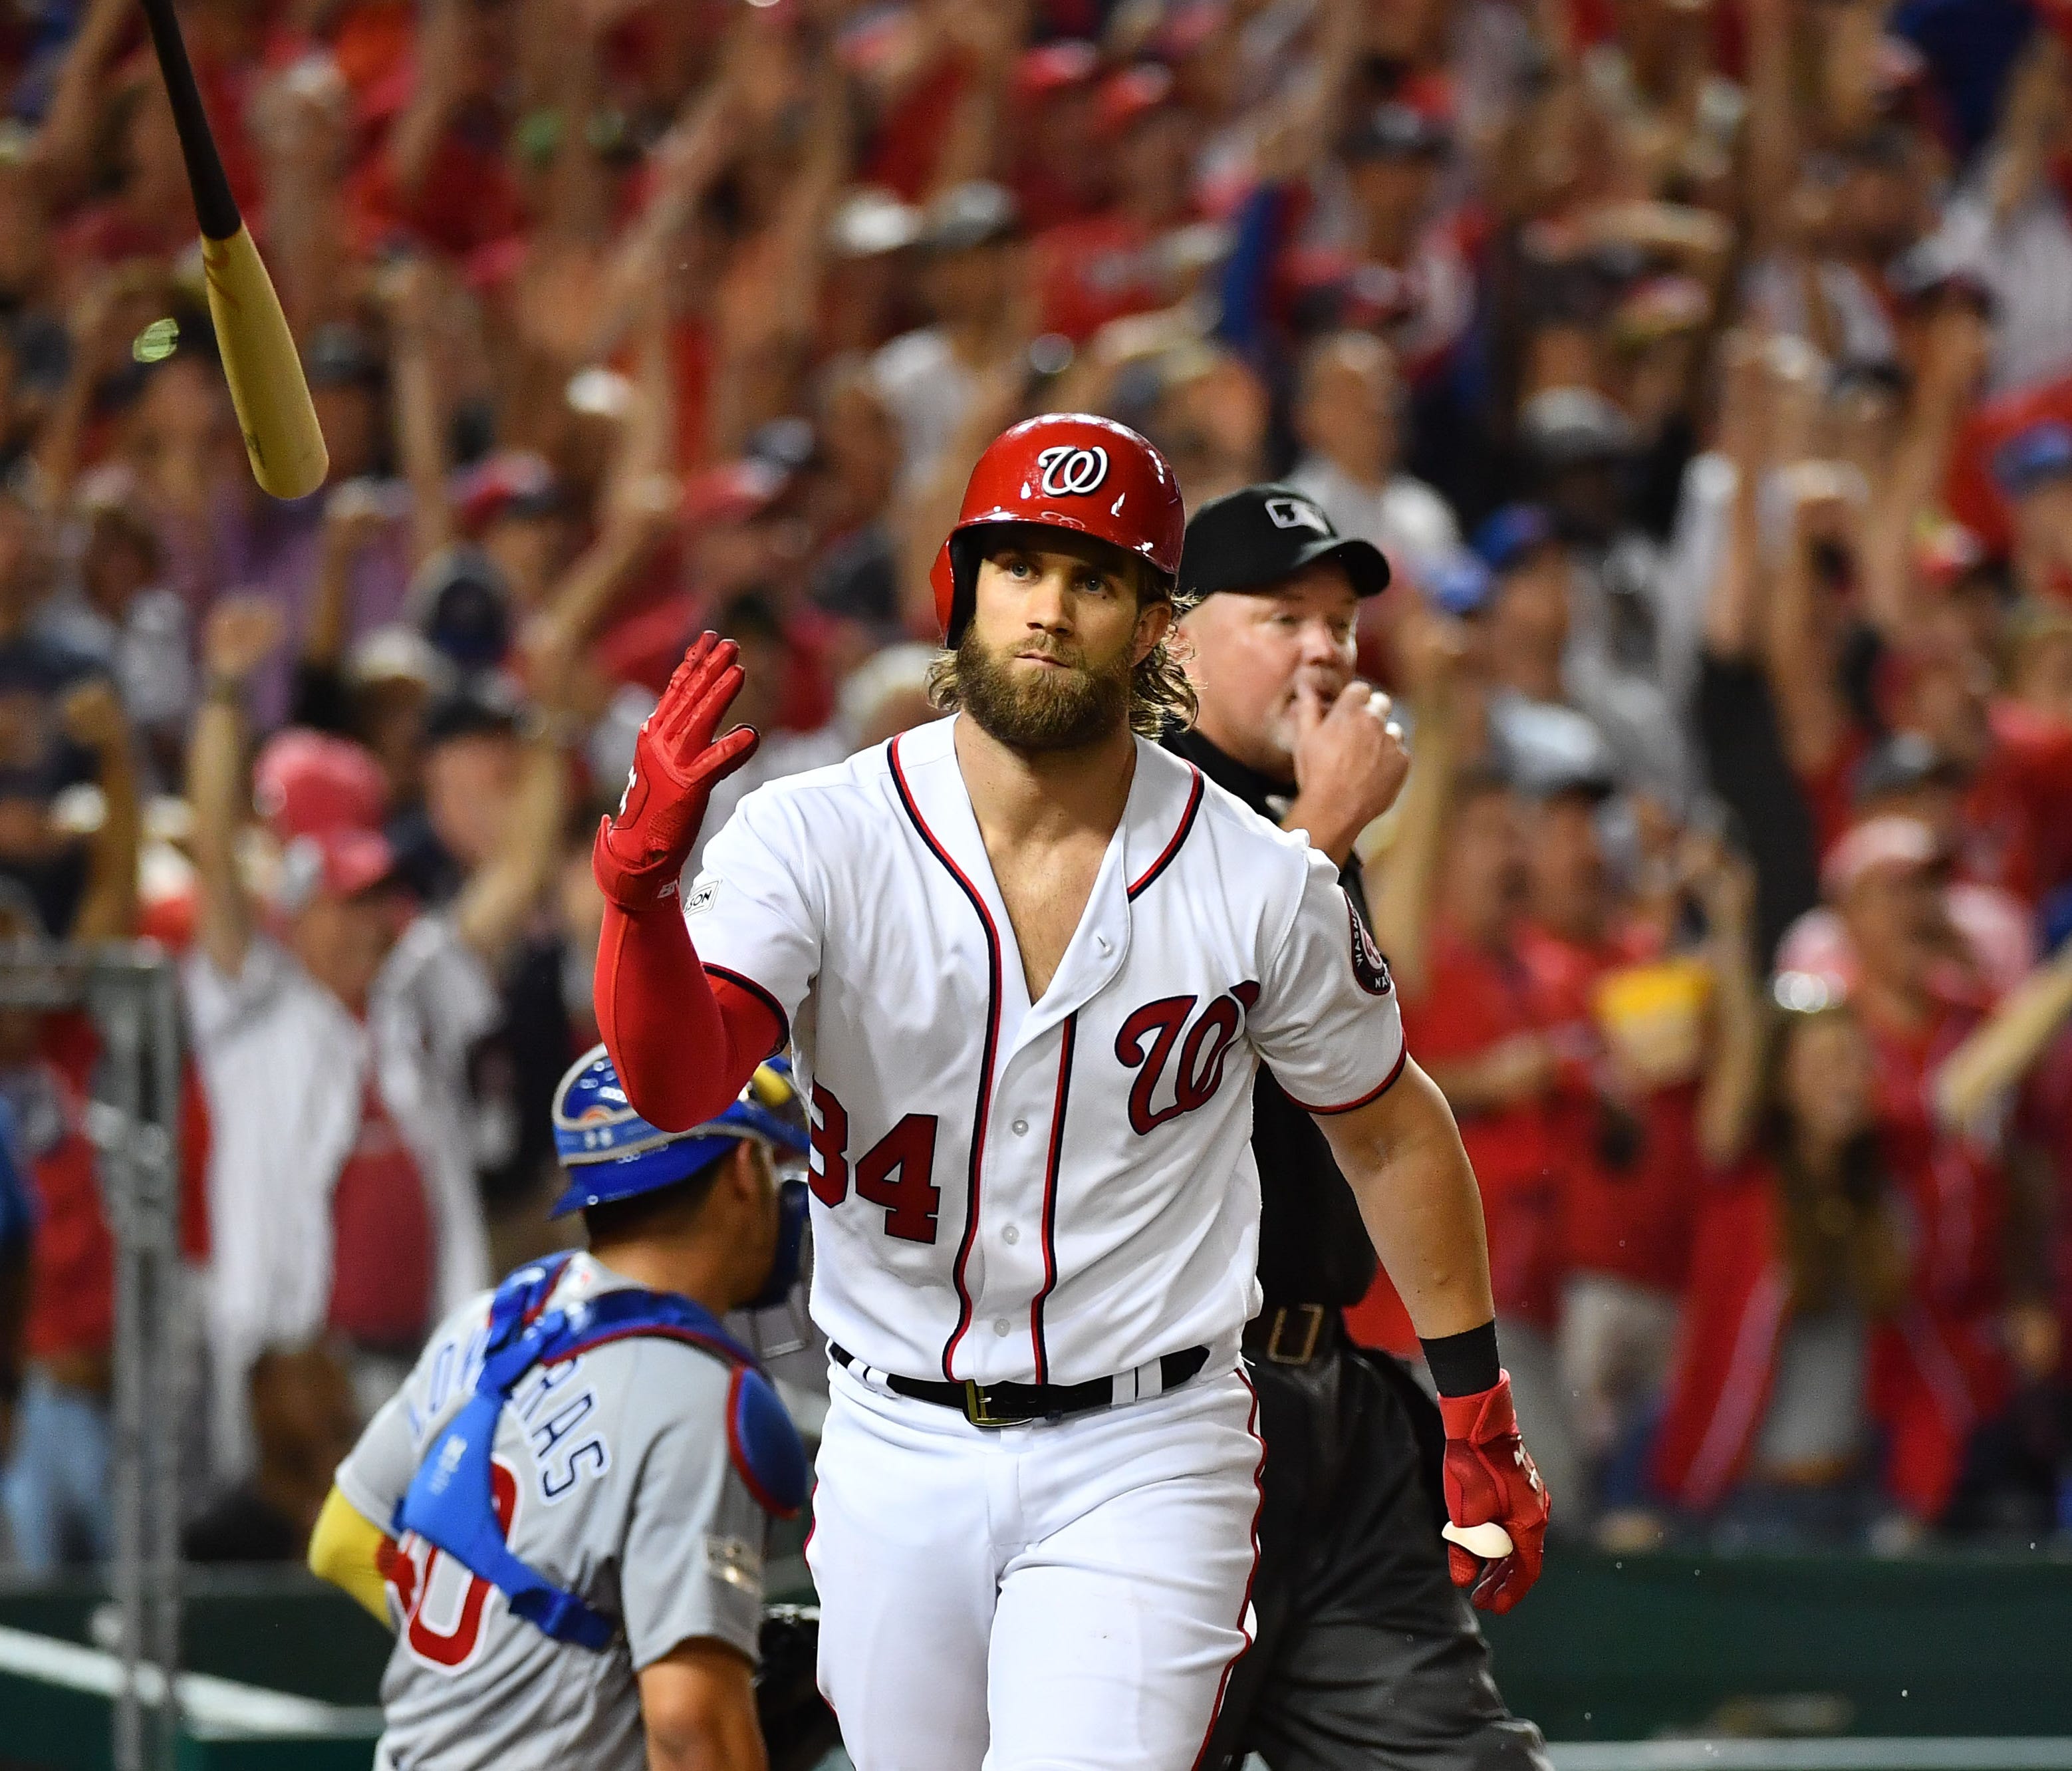 Bryce Harper flips the bat after a two-run home run in the eighth inning.